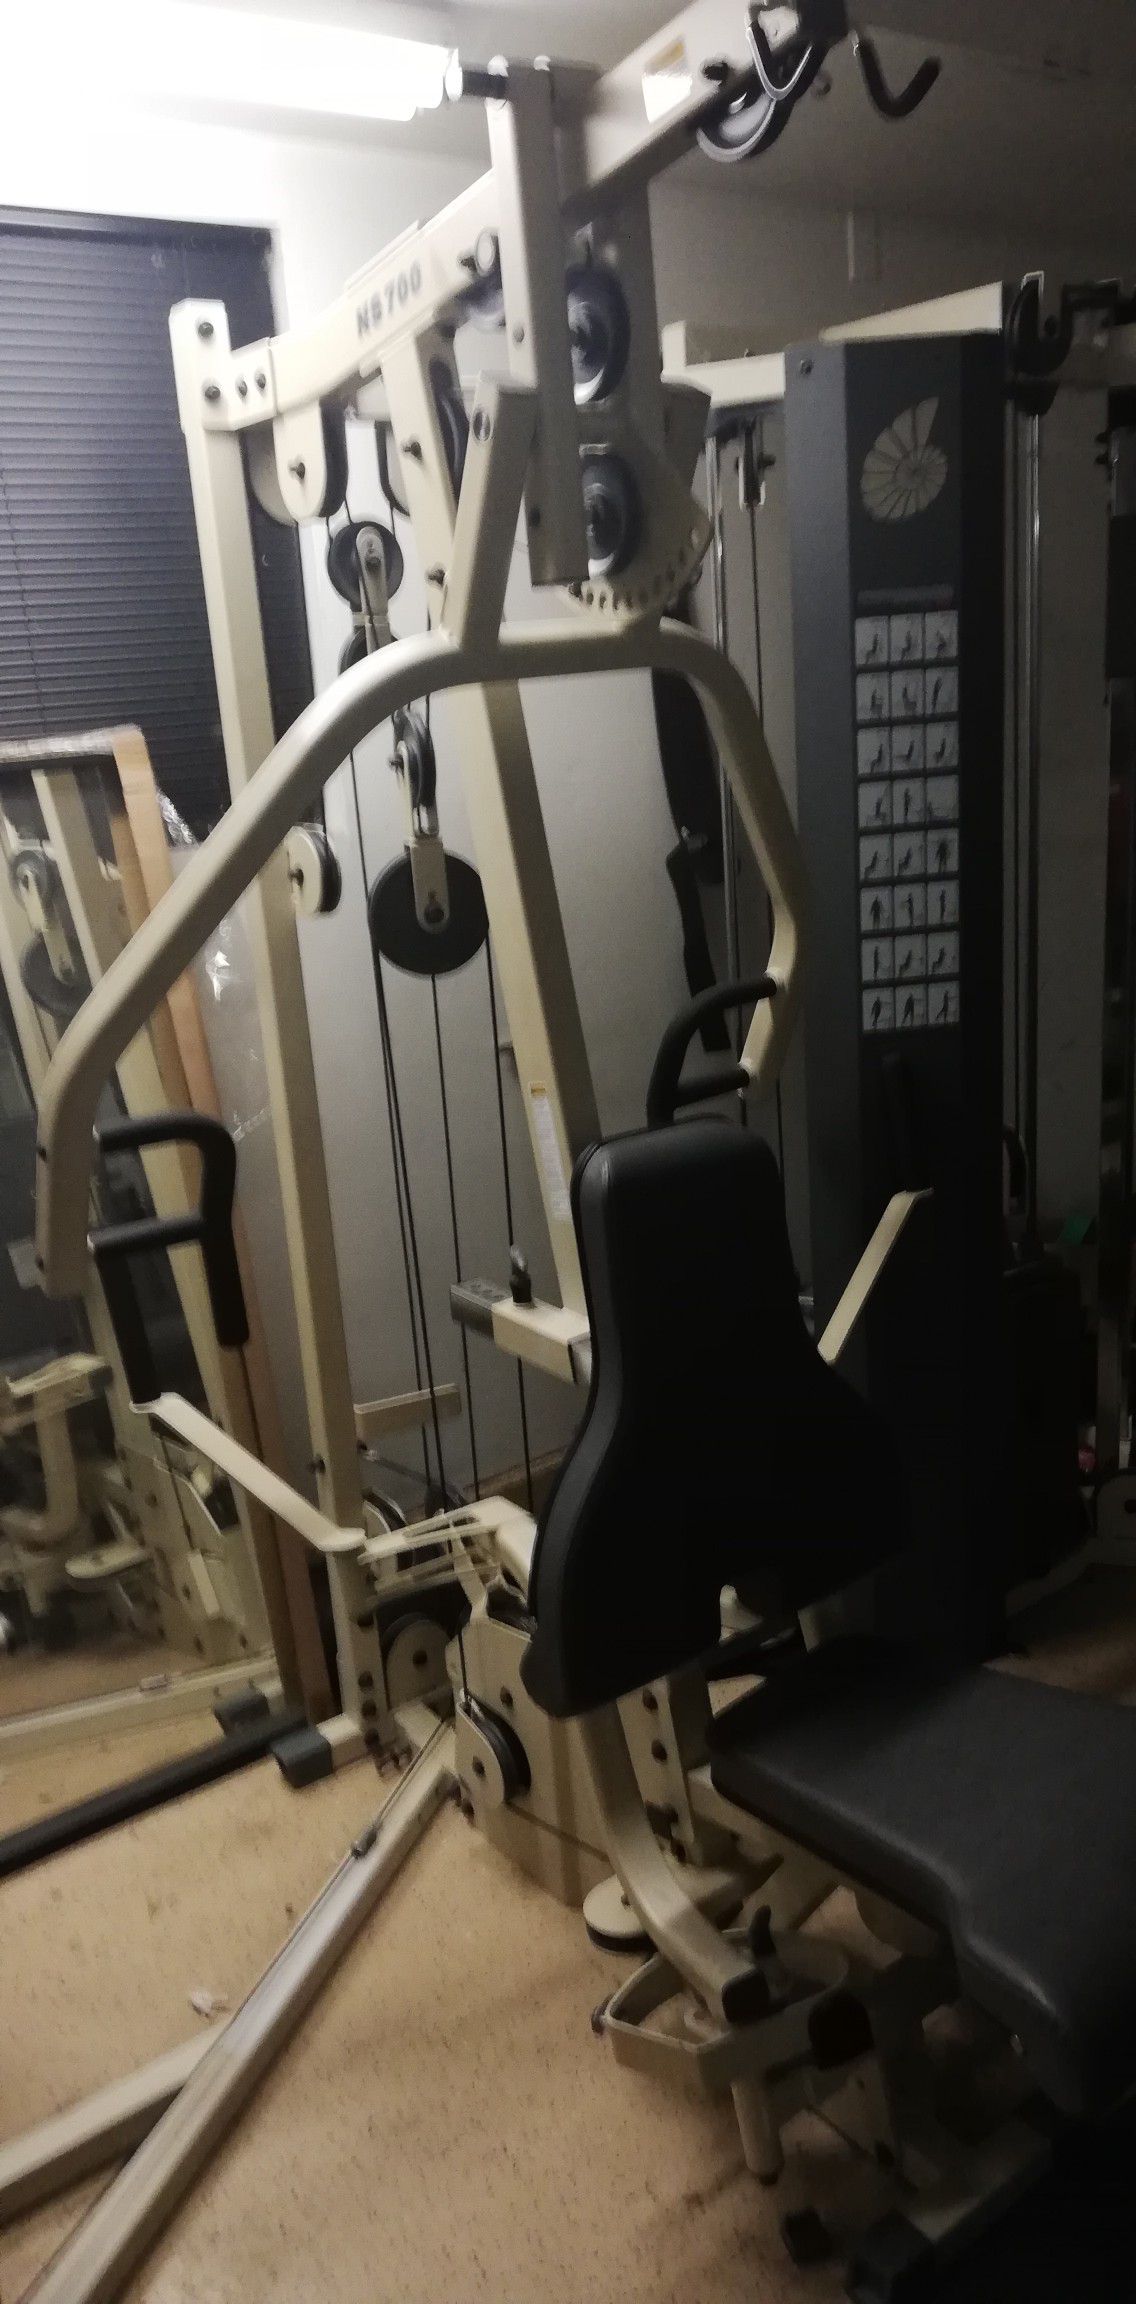 Nautilus NS7000 Home Gym with Cable Crossover, Chest Press, Lat Pulldown, Back Rows, Shoulder Press, Leg curl, Triceps Pushdown